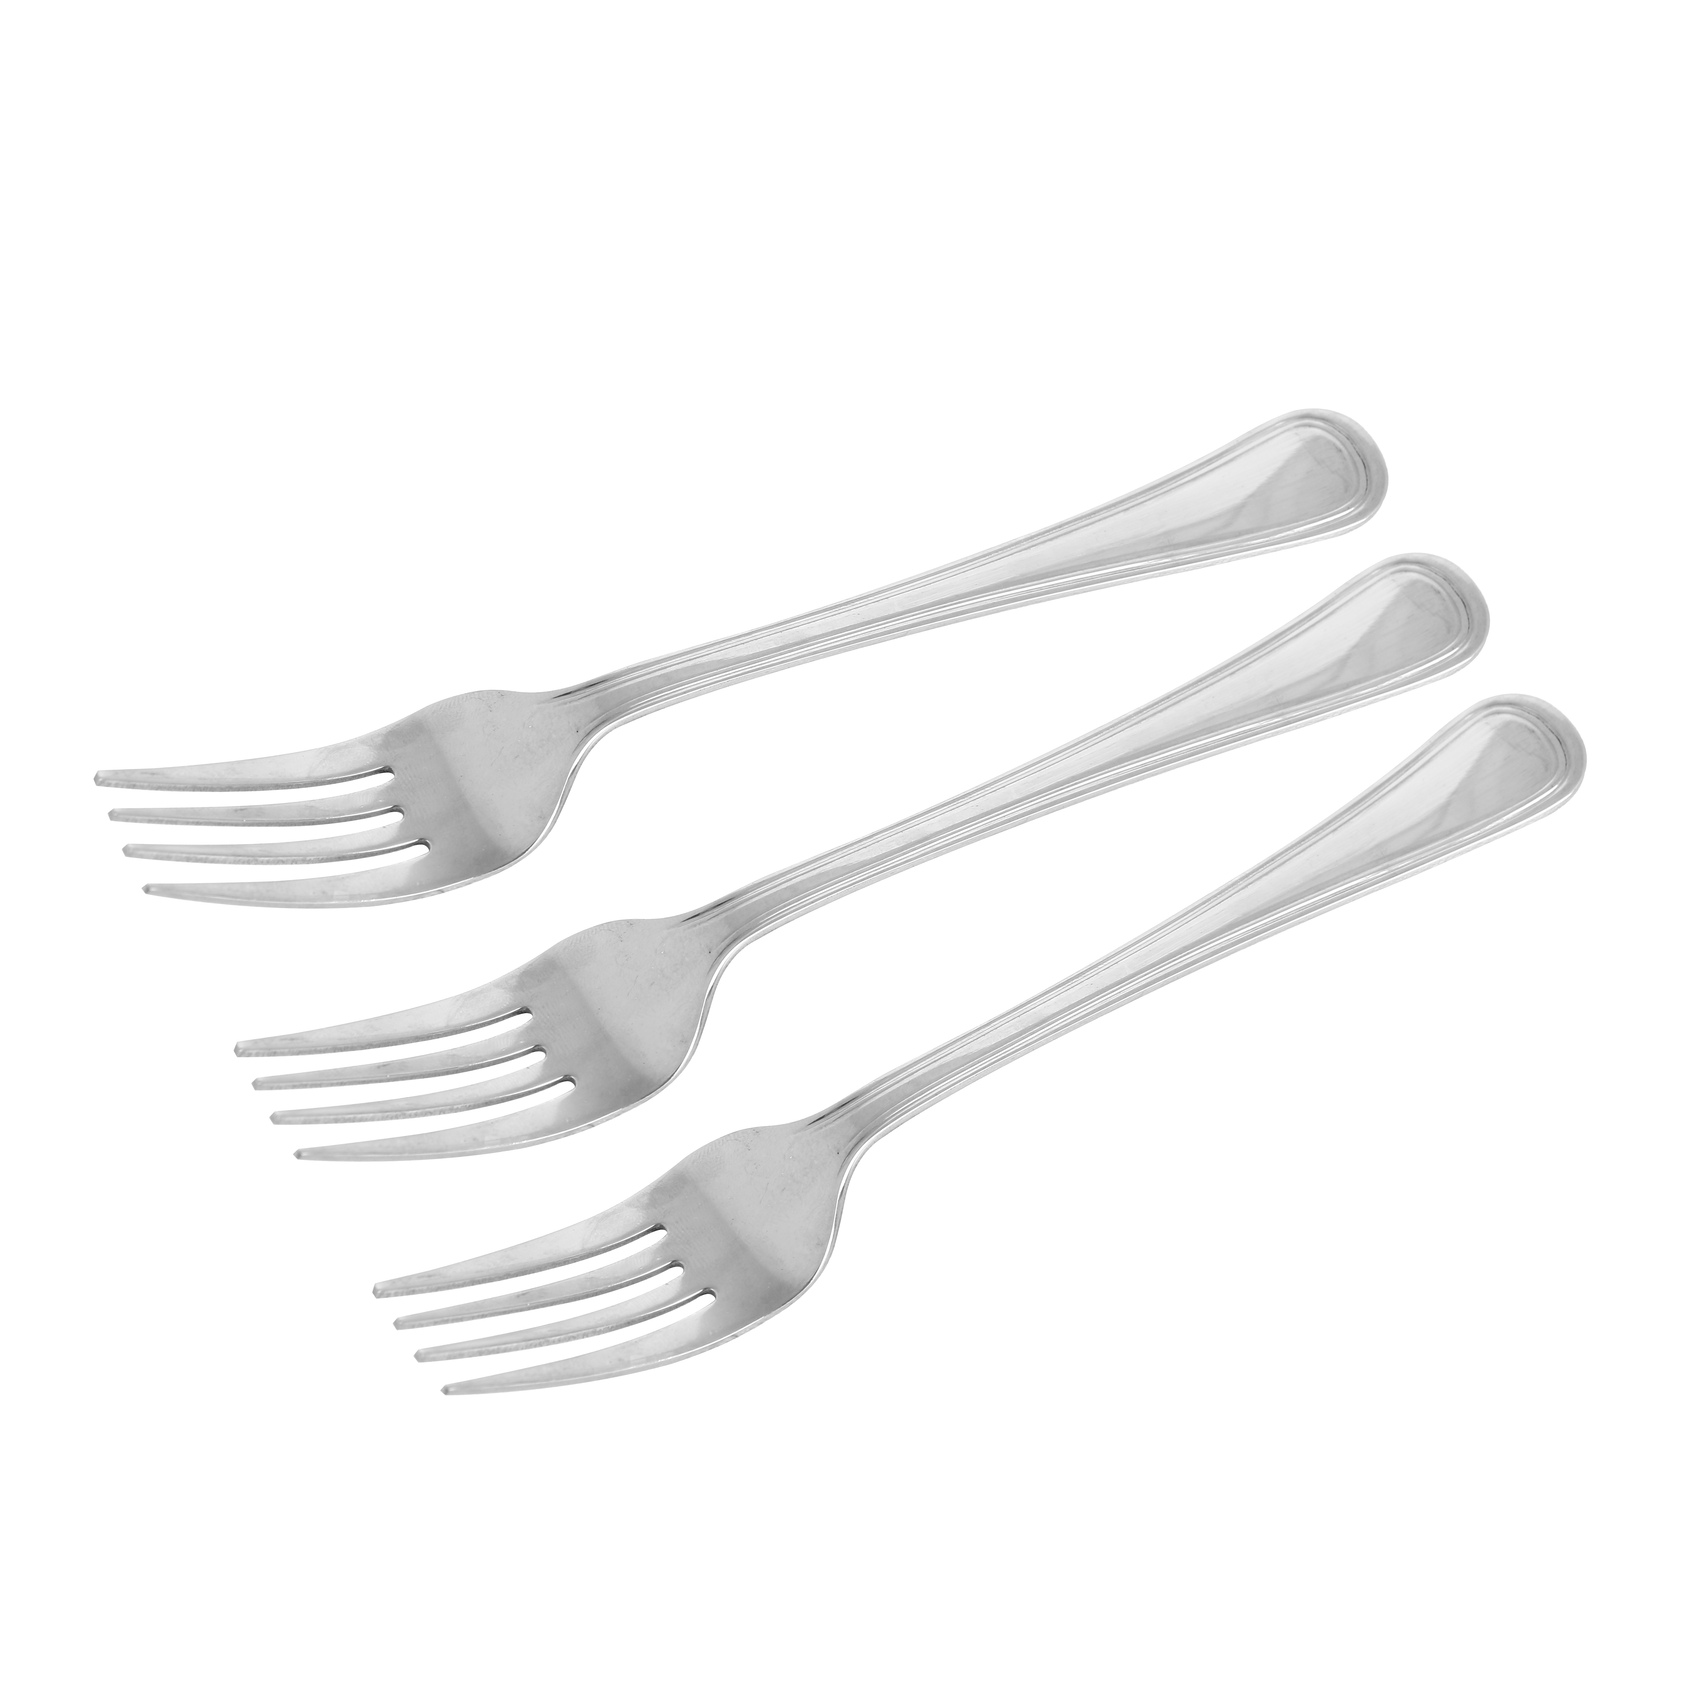 1,000 Plastic Disposable Cutlery Bulk Variety Pack White Medium Weight  Includes 334 forks, 333 knives, 333 soup spoons, Disposable Silverware  Plastic